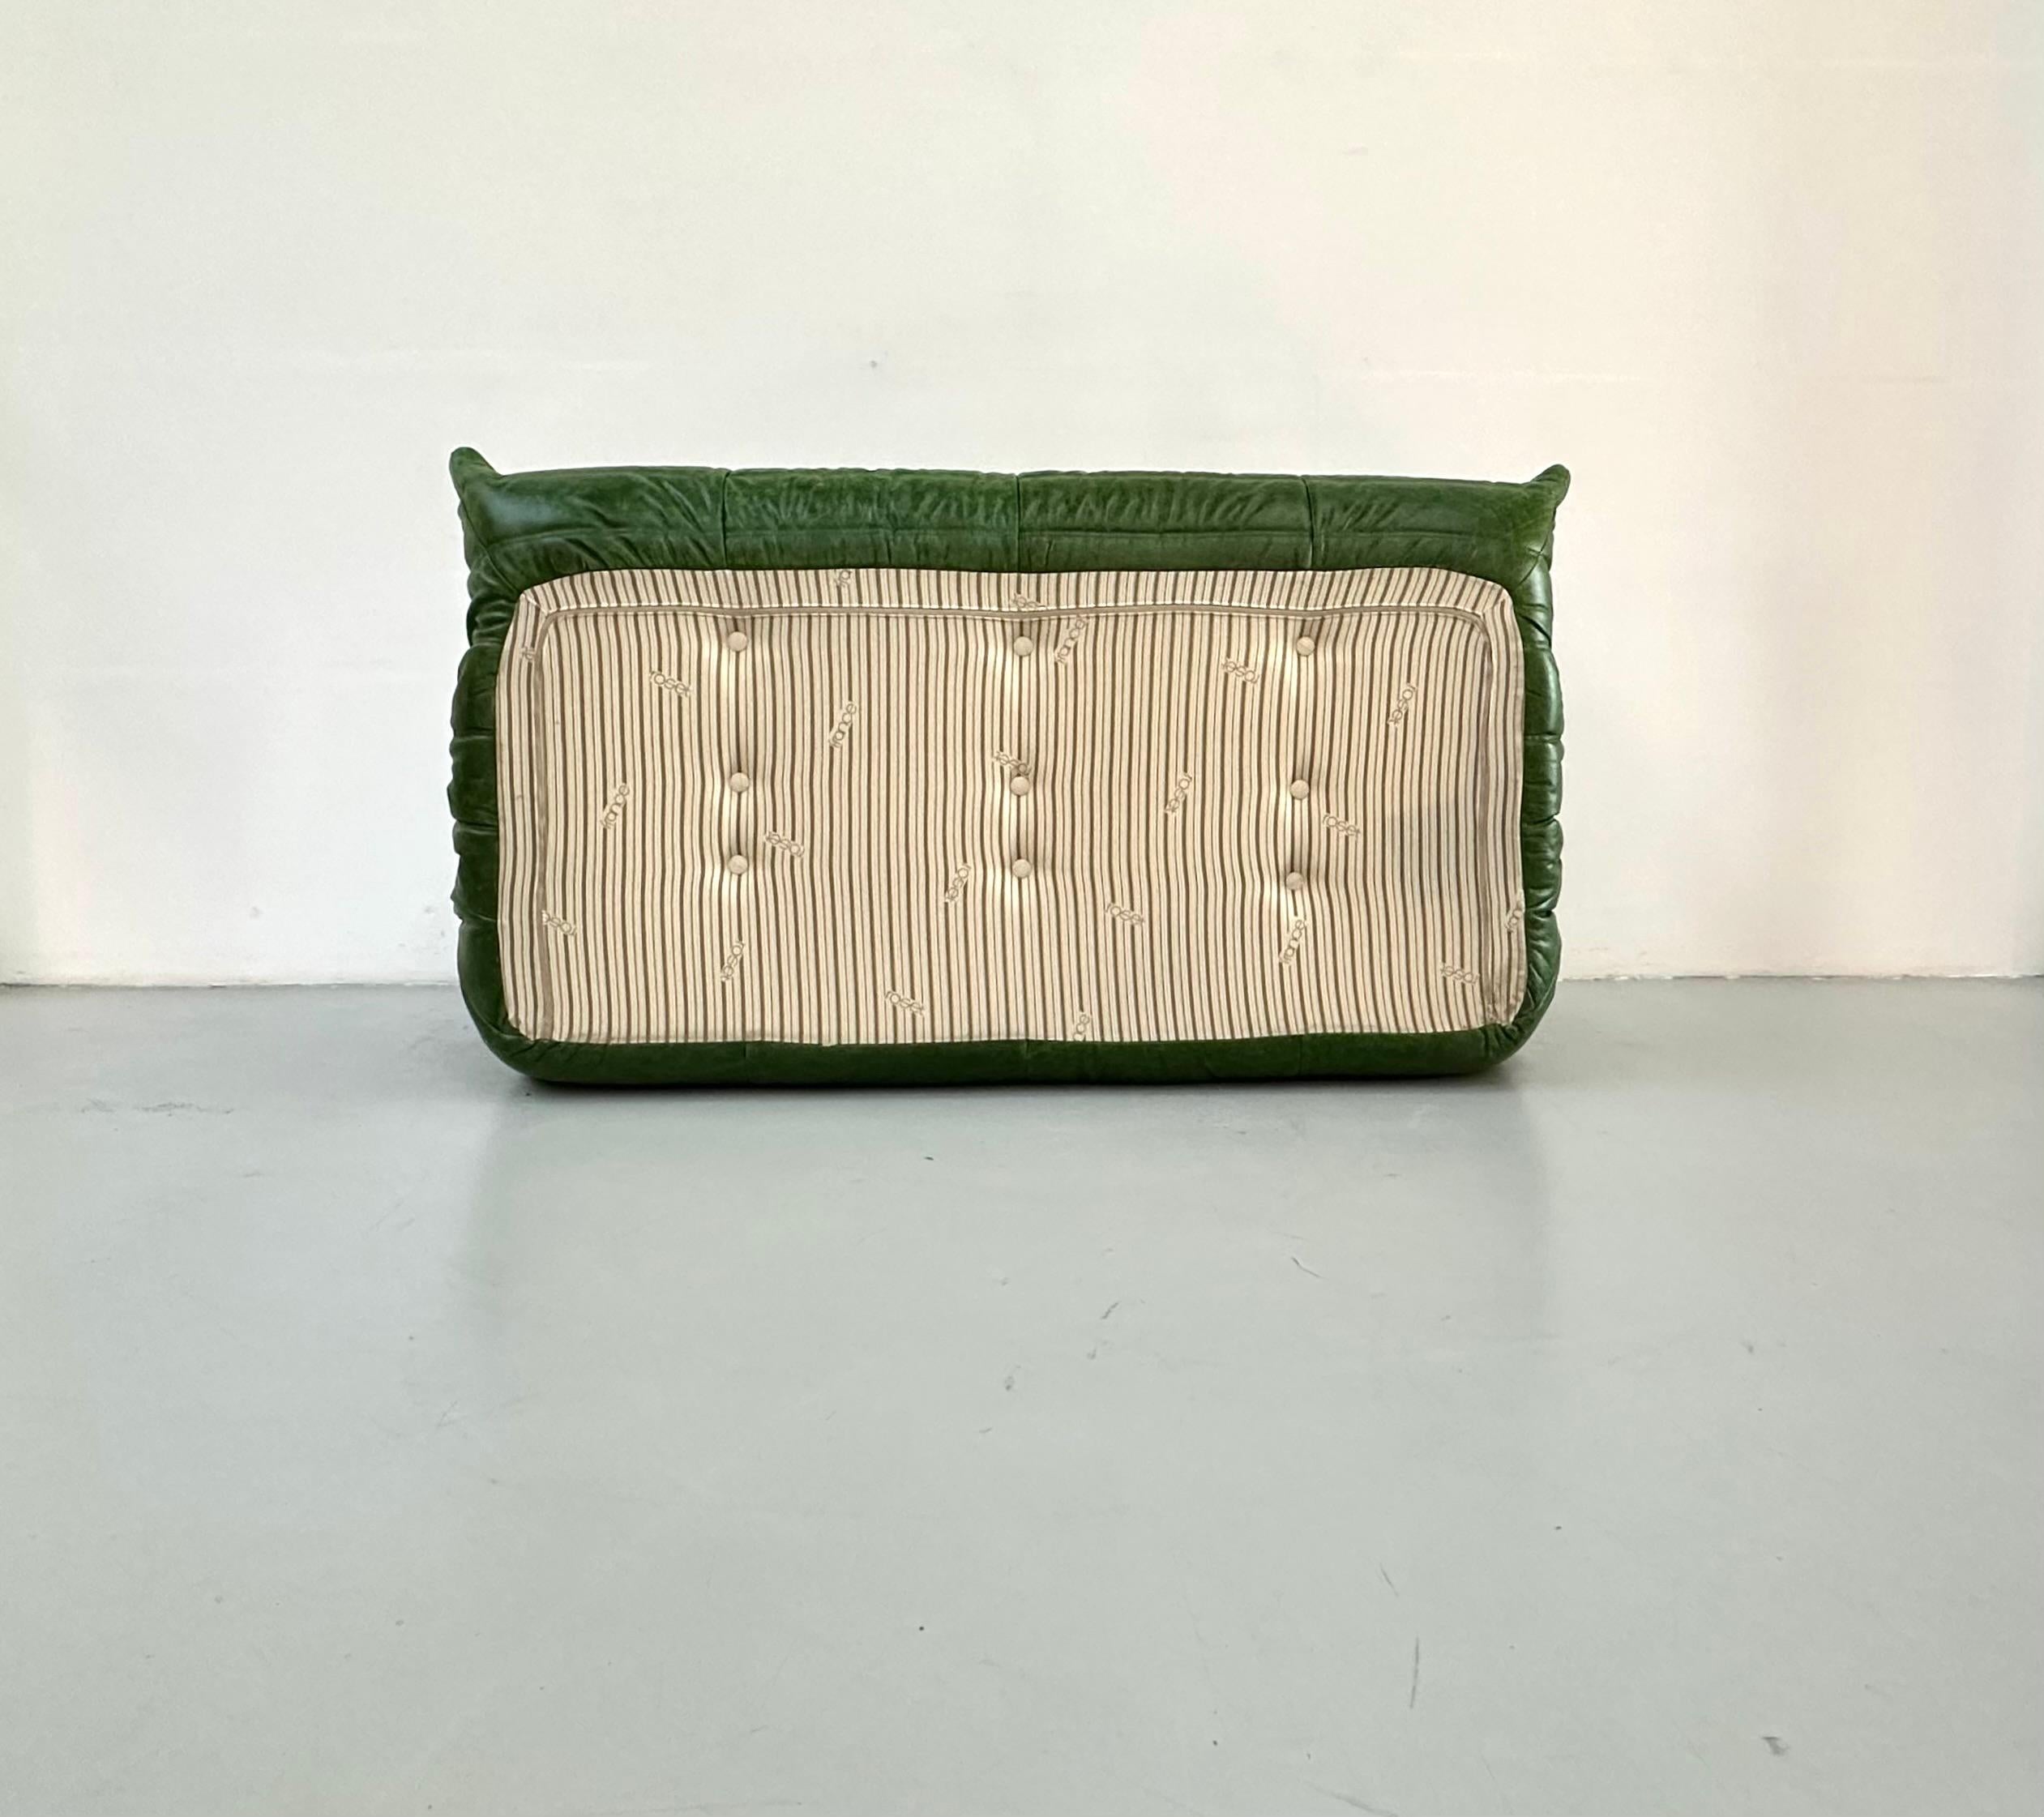 French Vintage Togo Sofa in Green Leather by Michel Ducaroy for Ligne Roset. 2